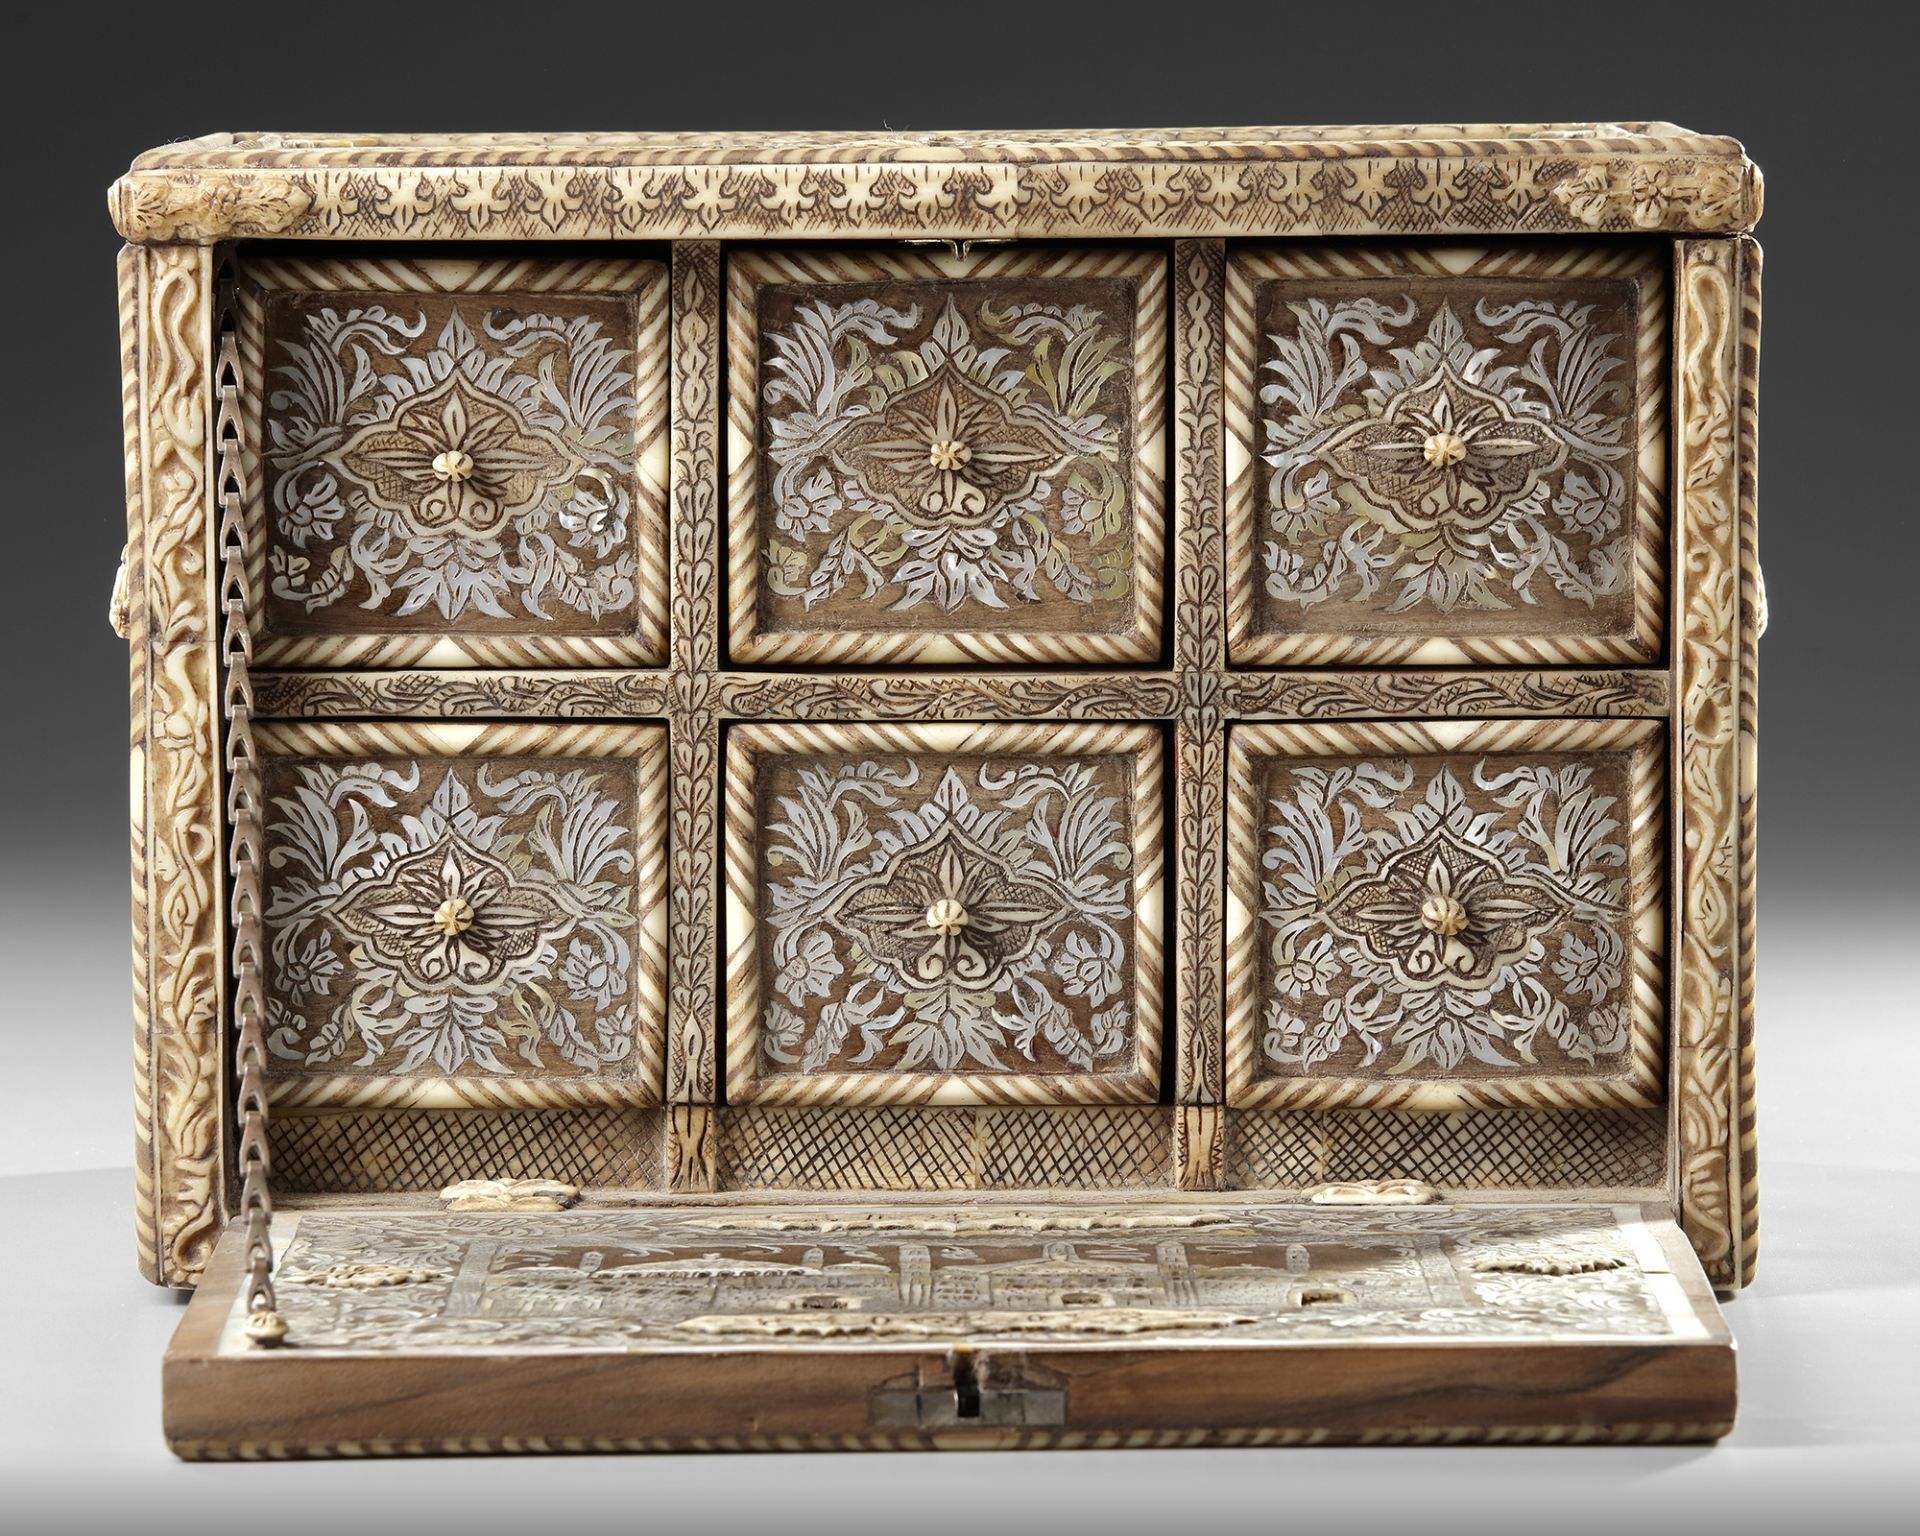 AN OTTOMAN MOTHER-OF-PEARL AND BONE INLAID CABINET, TURKEY OR SYRIA, 18TH-19TH CENTURY - Bild 2 aus 6